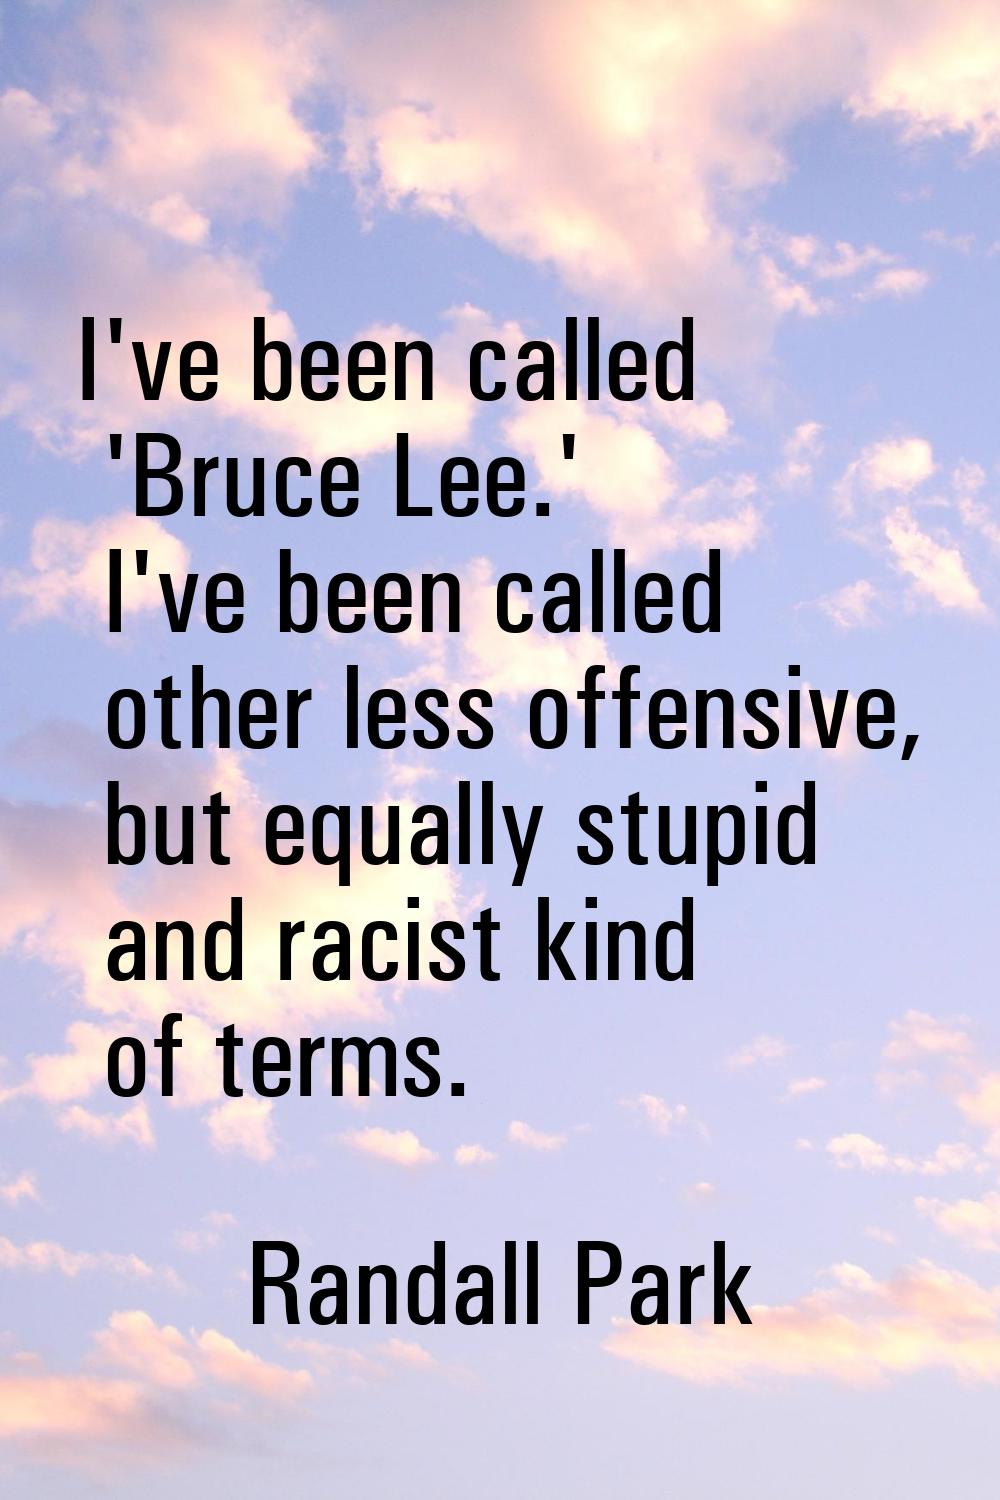 I've been called 'Bruce Lee.' I've been called other less offensive, but equally stupid and racist 